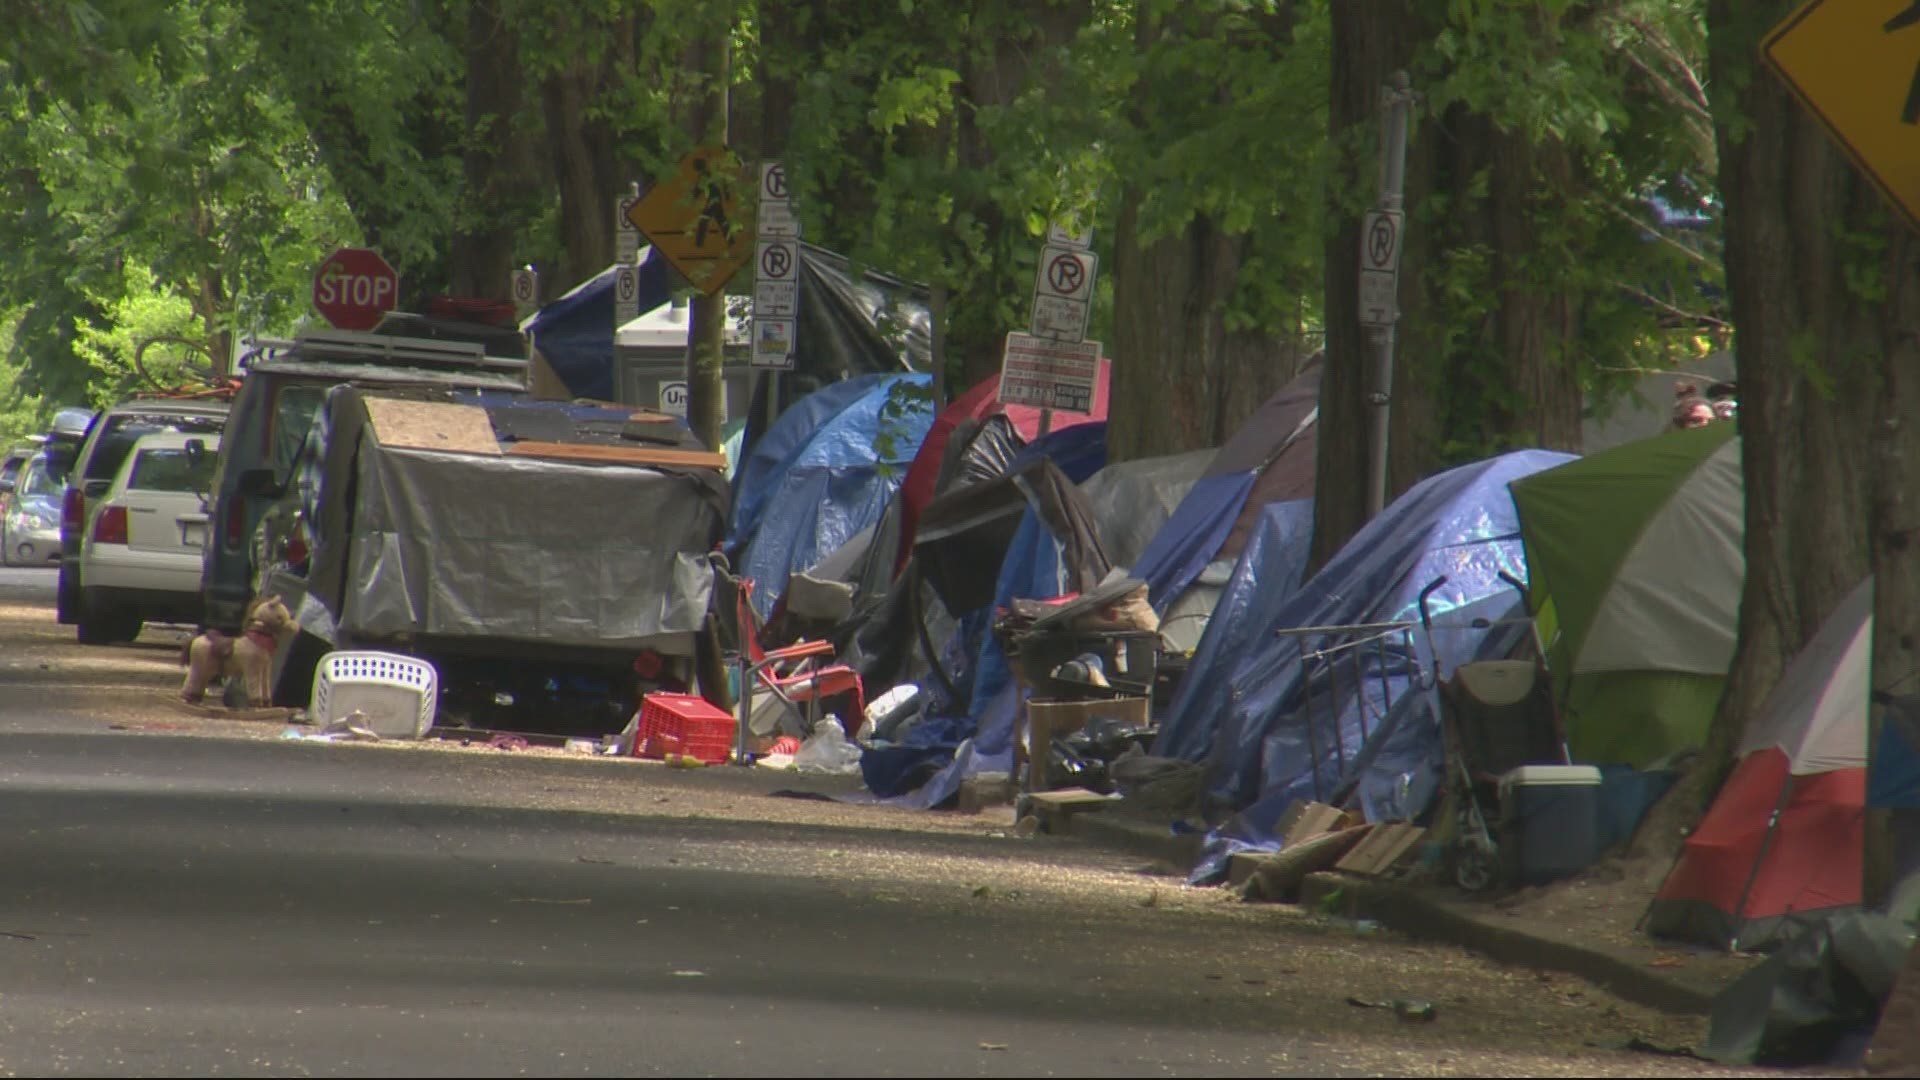 Starting Monday, May 24, the city of Portland will begin ramping up its clearing of homeless camps. Here's what the city will be looking for.